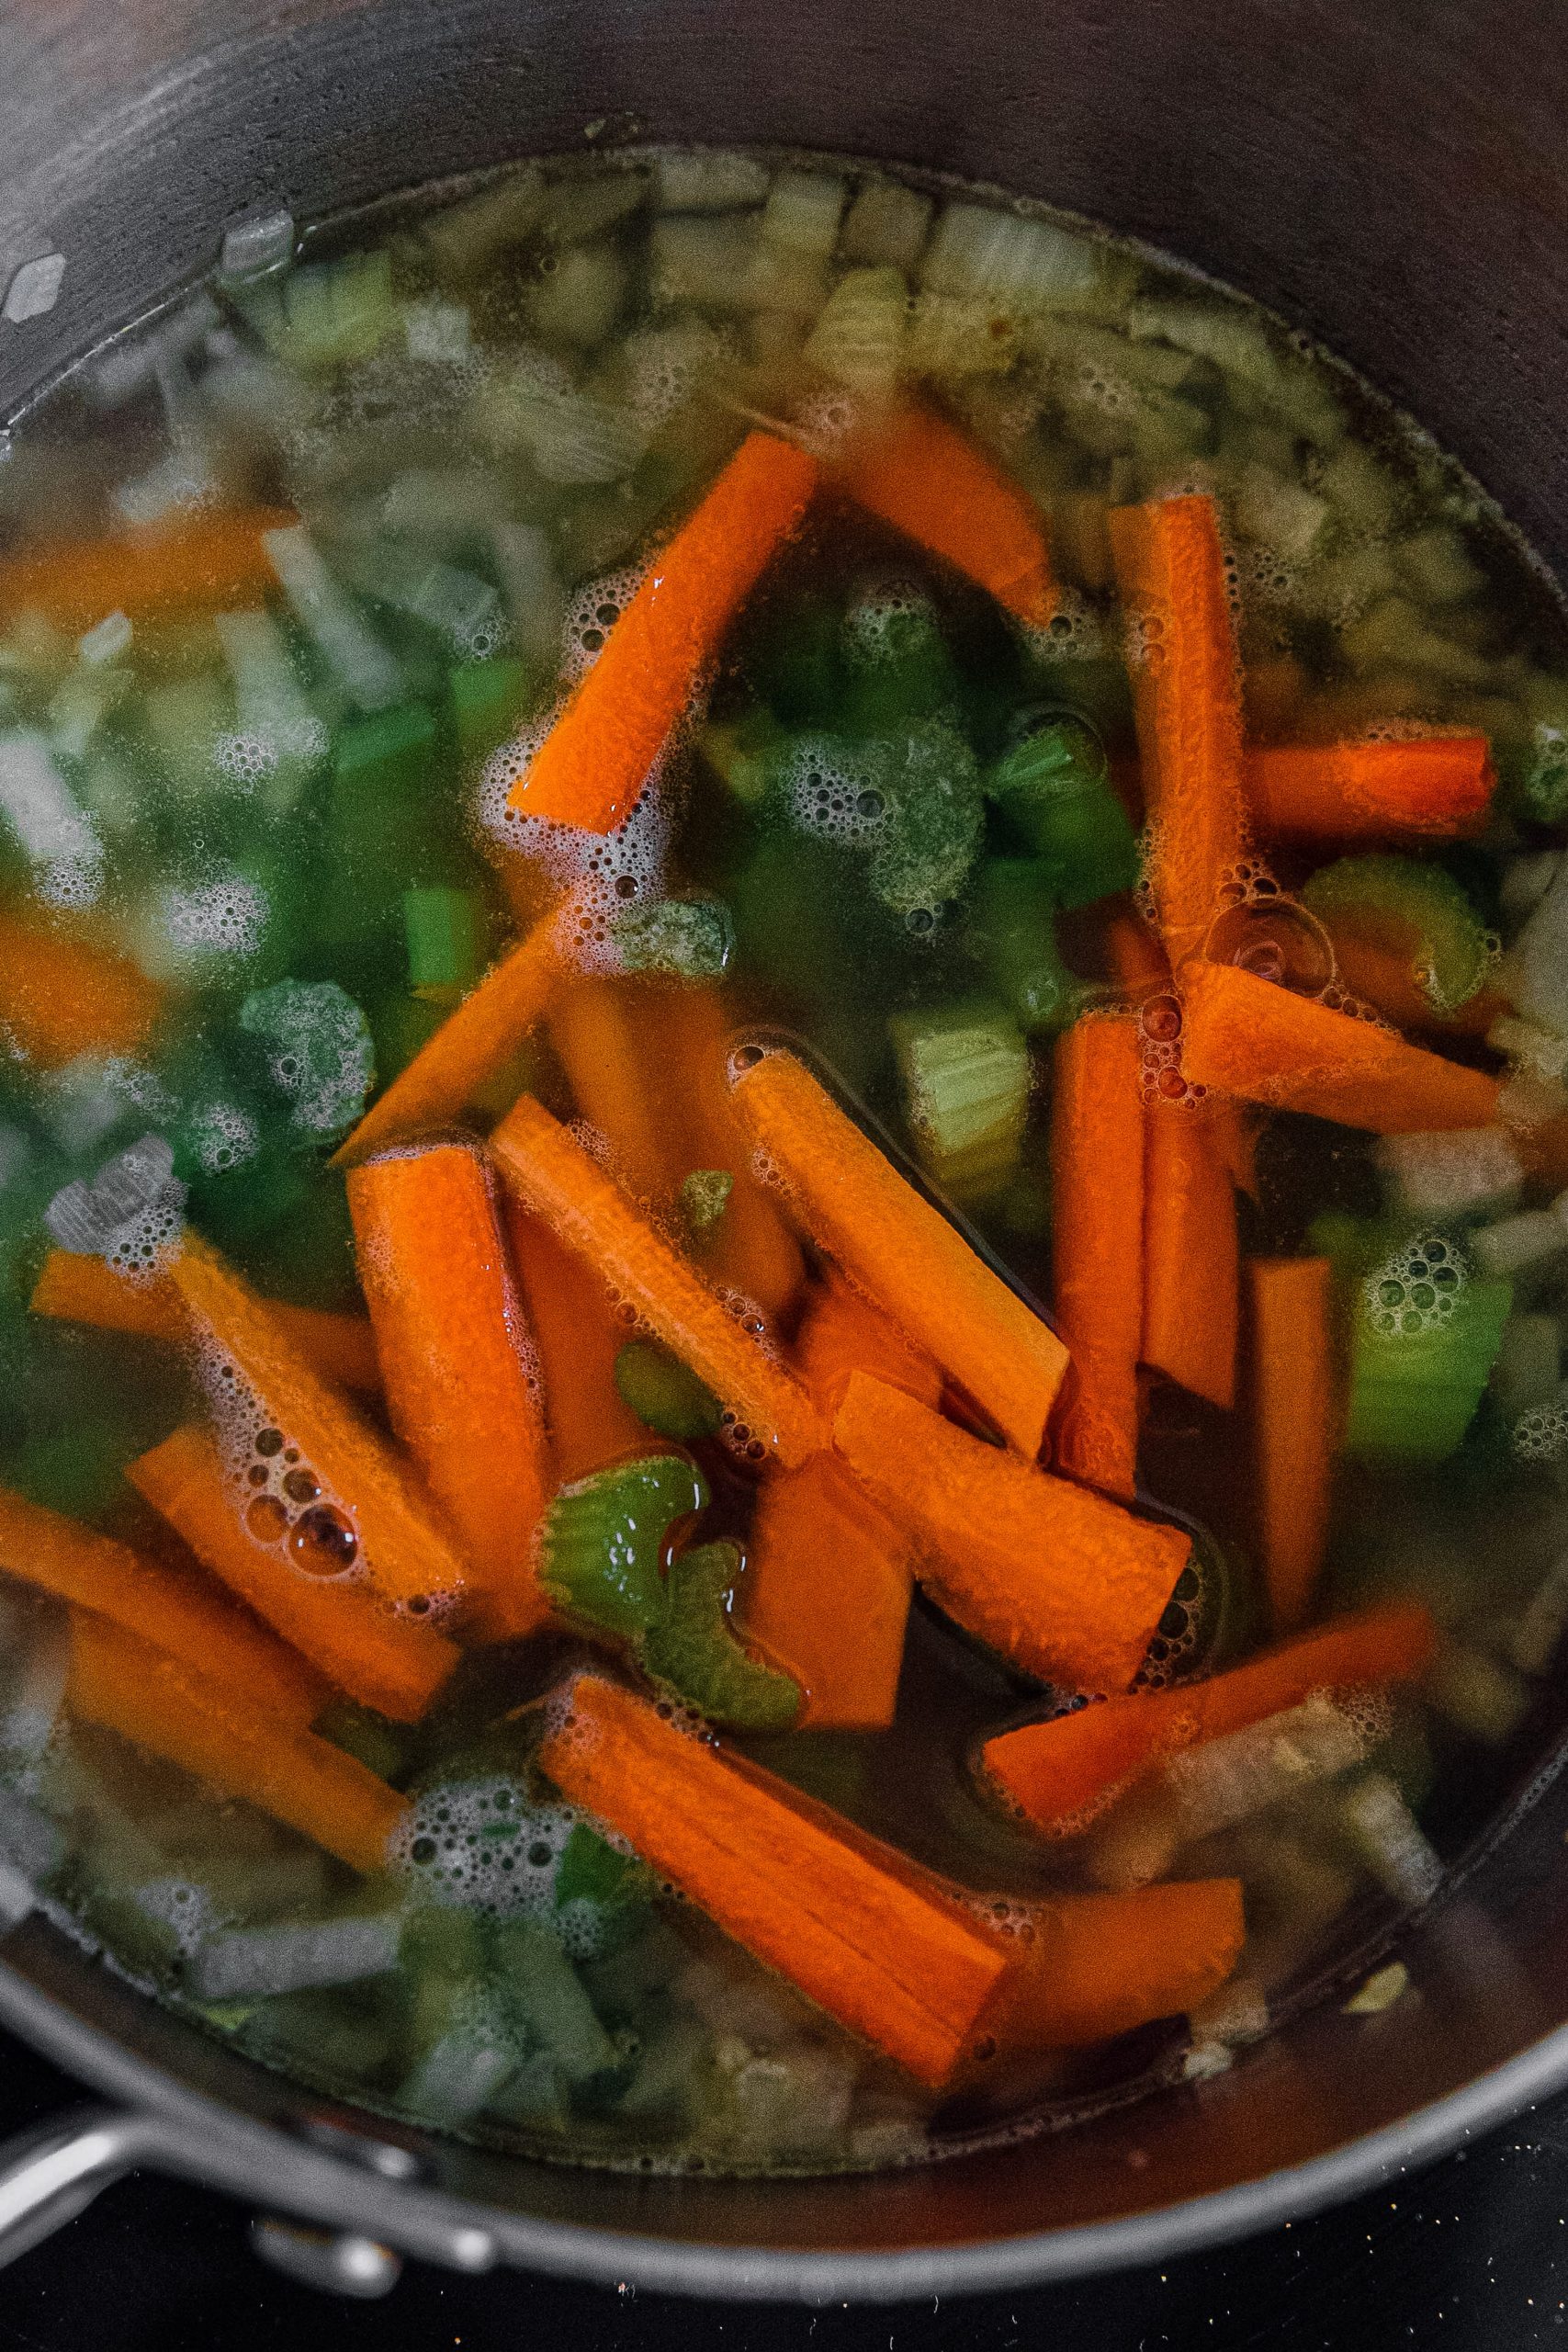 Add the celery and carrots to the pot, followed by the chicken stock. Bring to a boil, then reduce to a simmer.